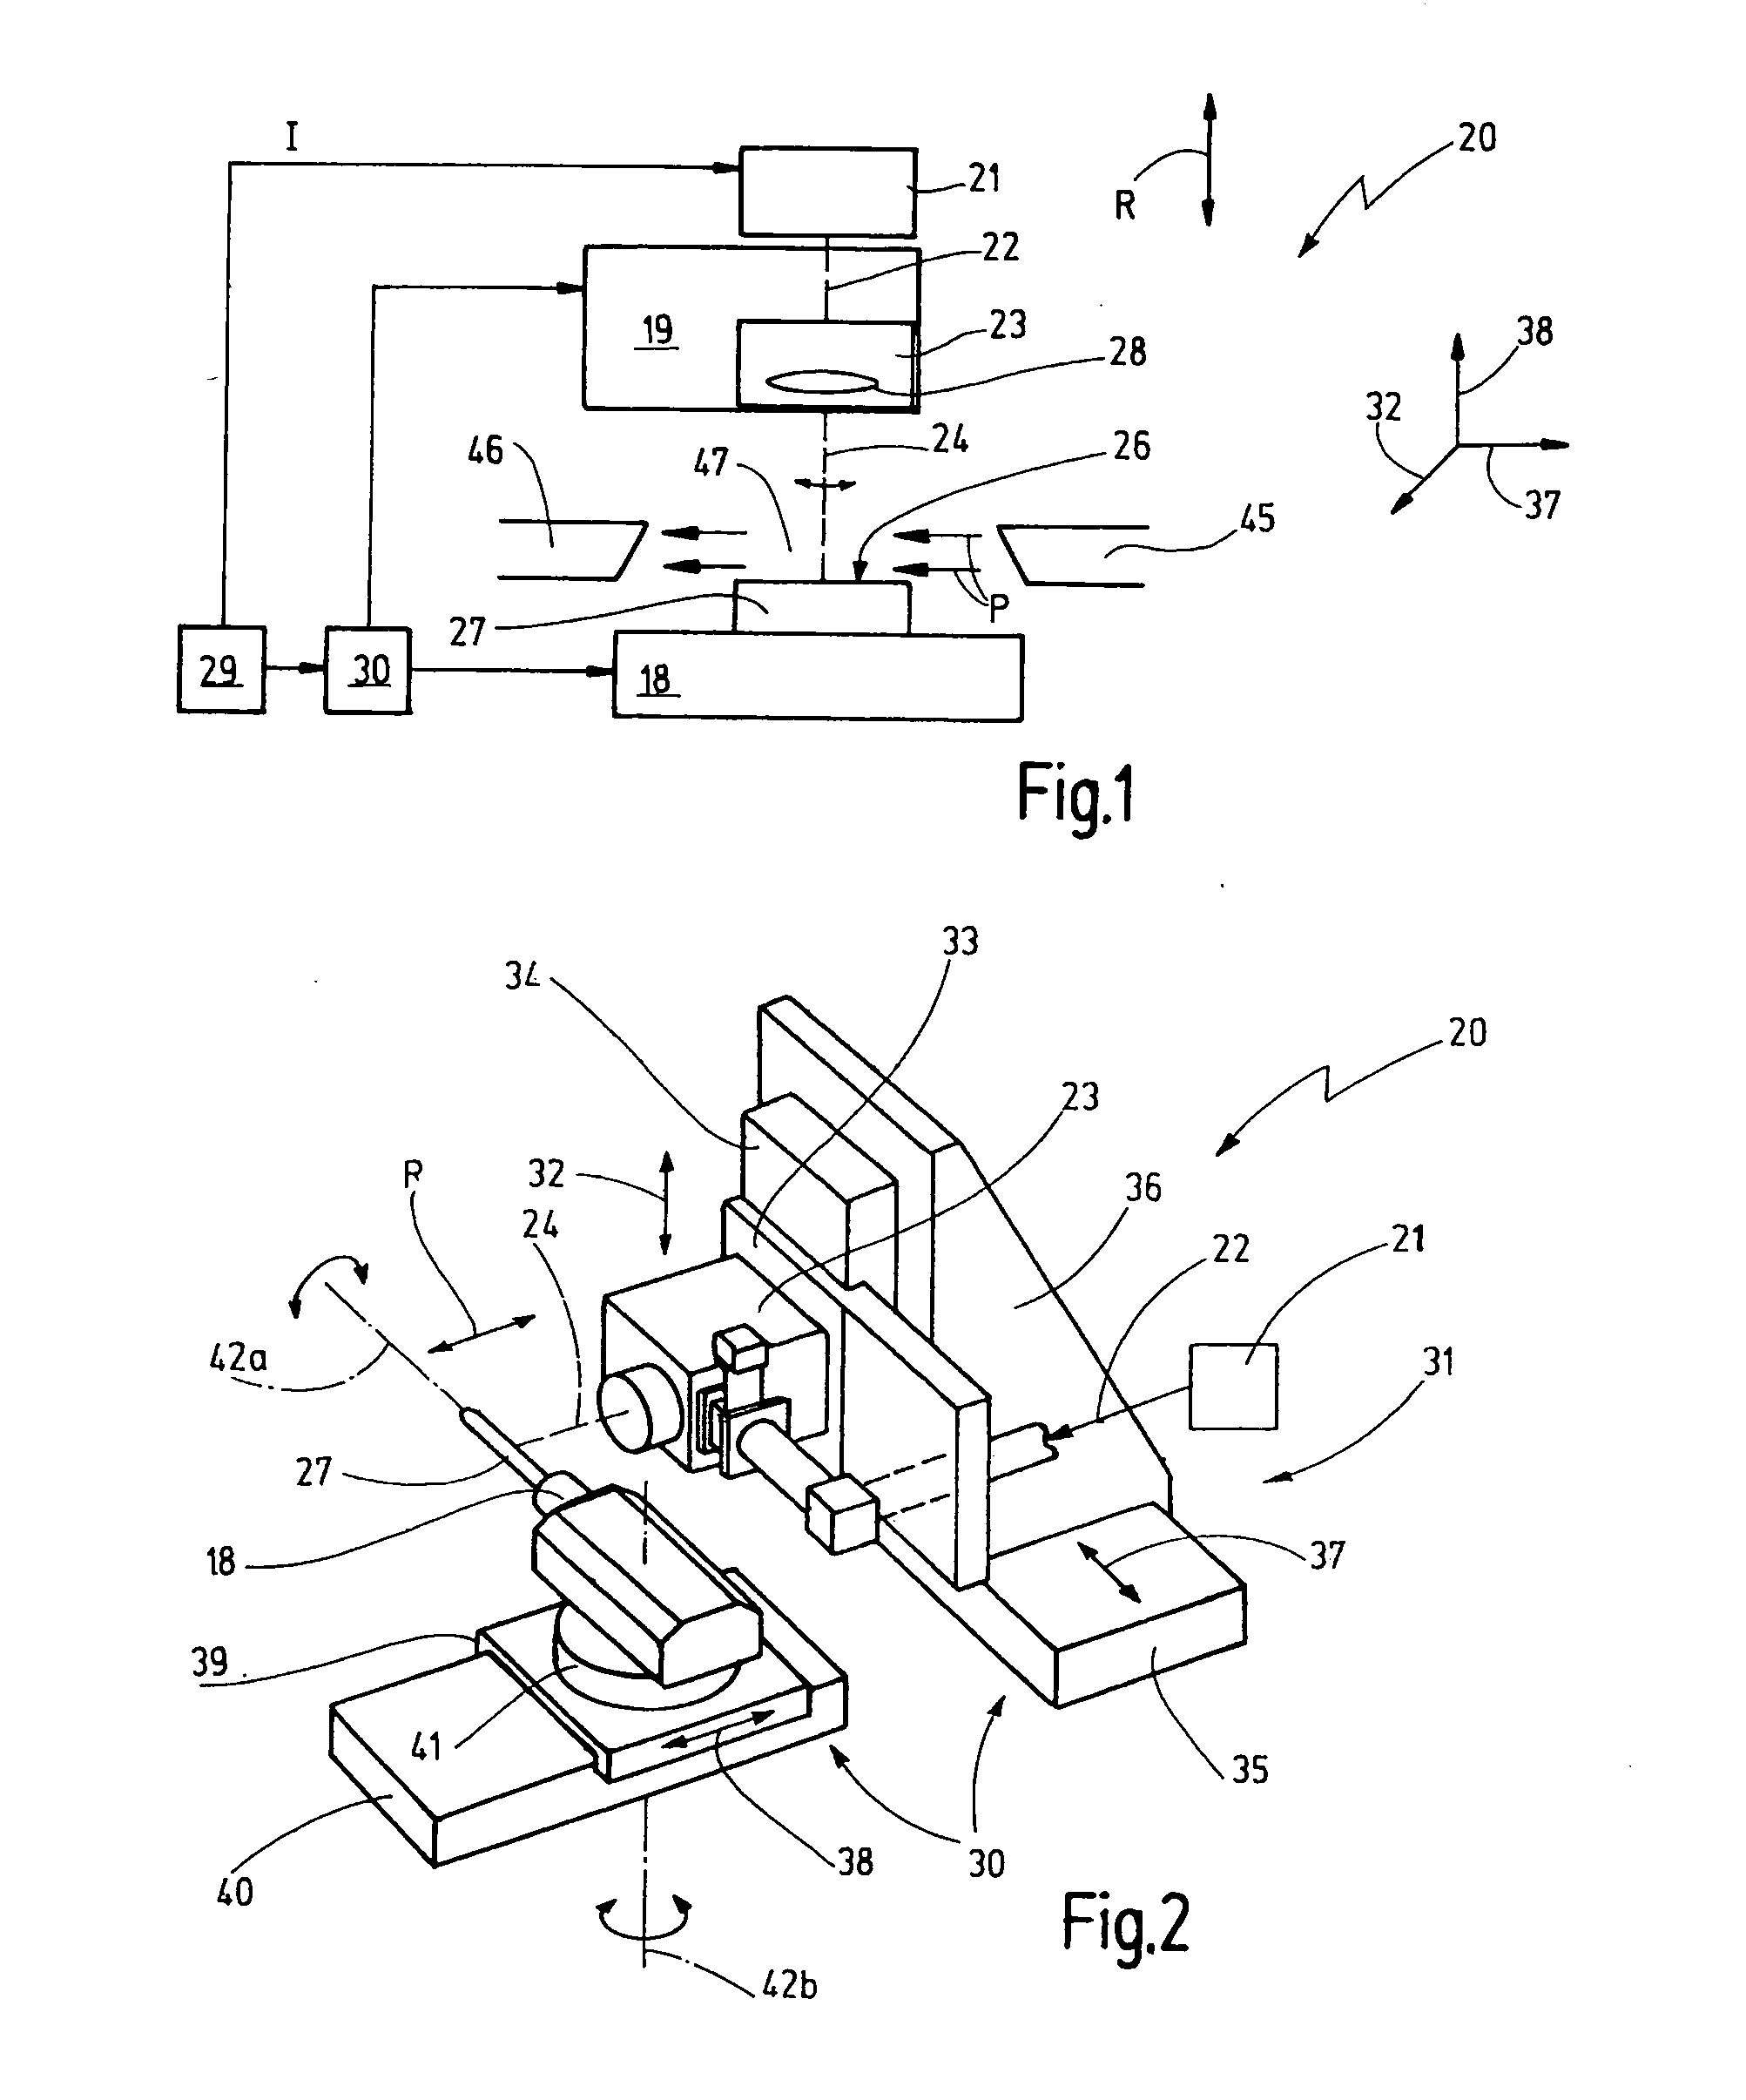 Laser machining apparatus and method for forming a surface on an unifinished product